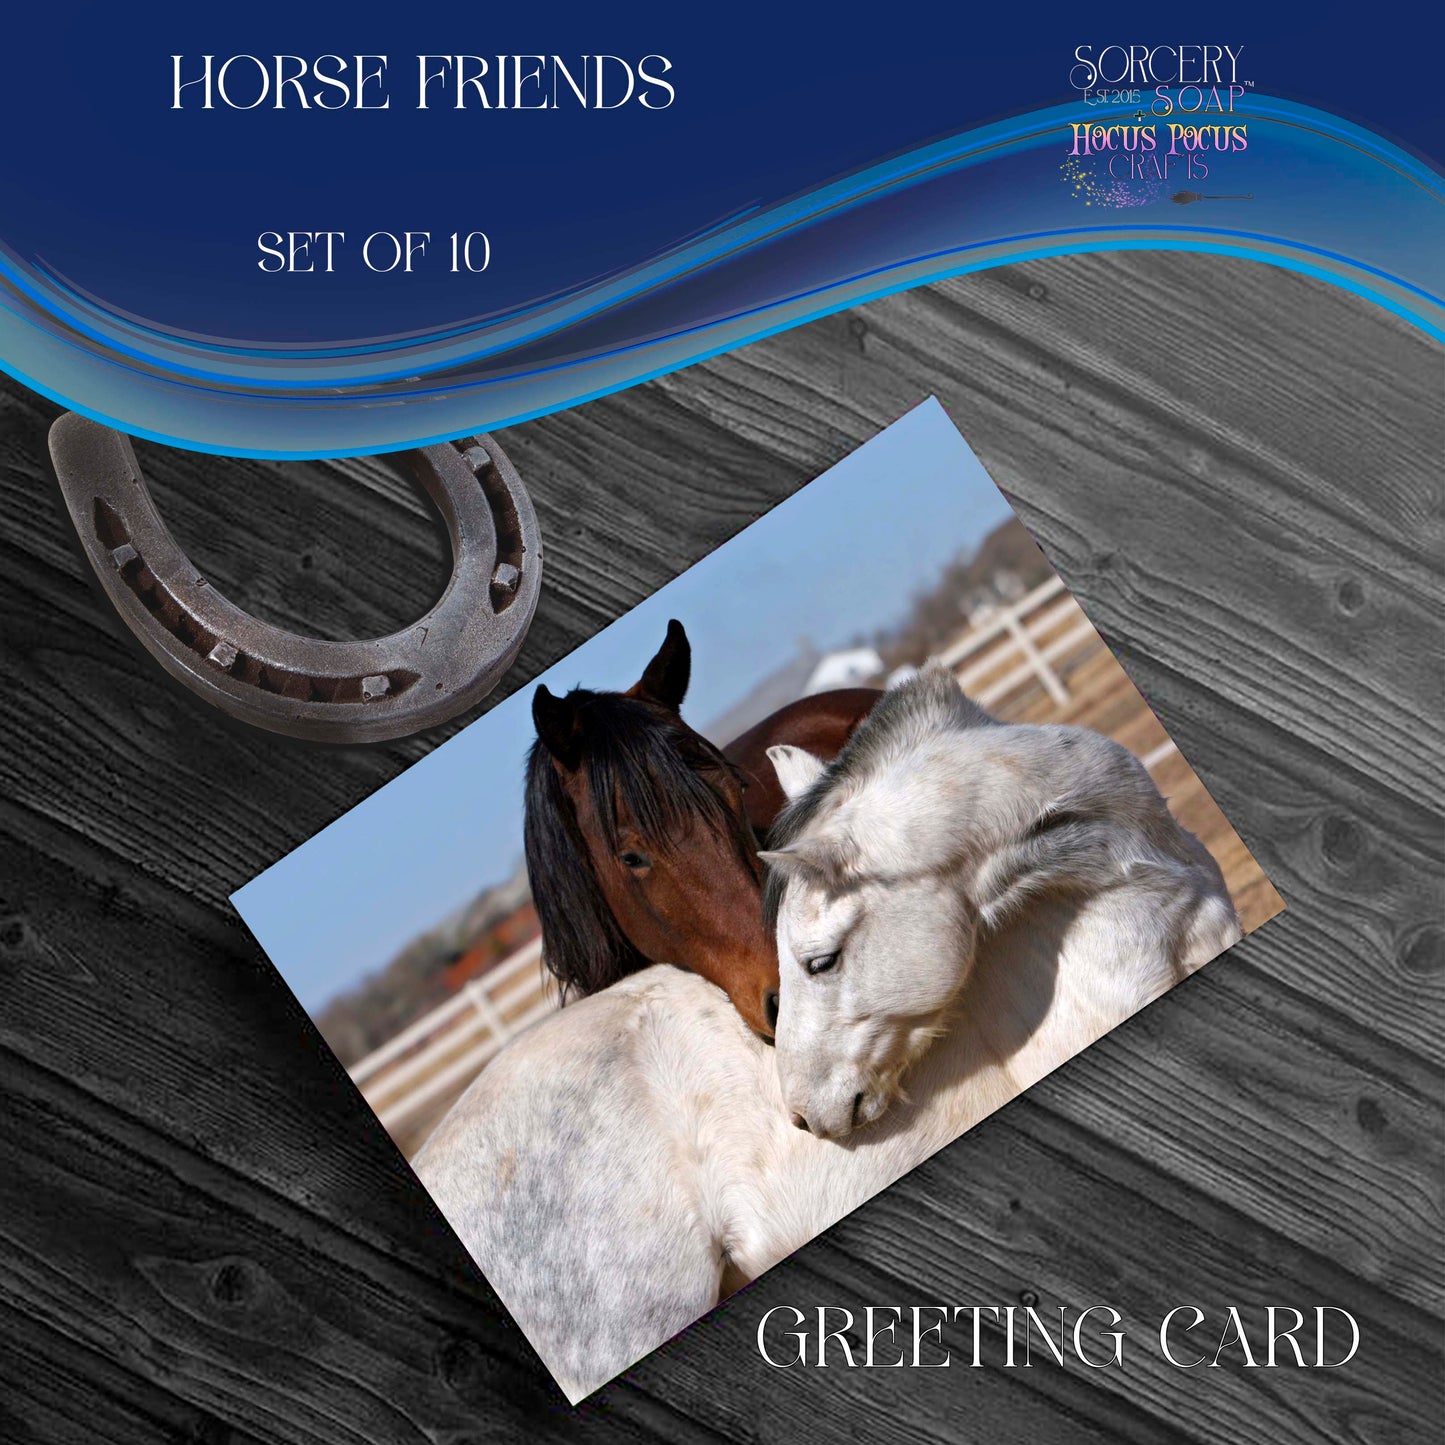 Back Country Greeting Cards - Horse Friends